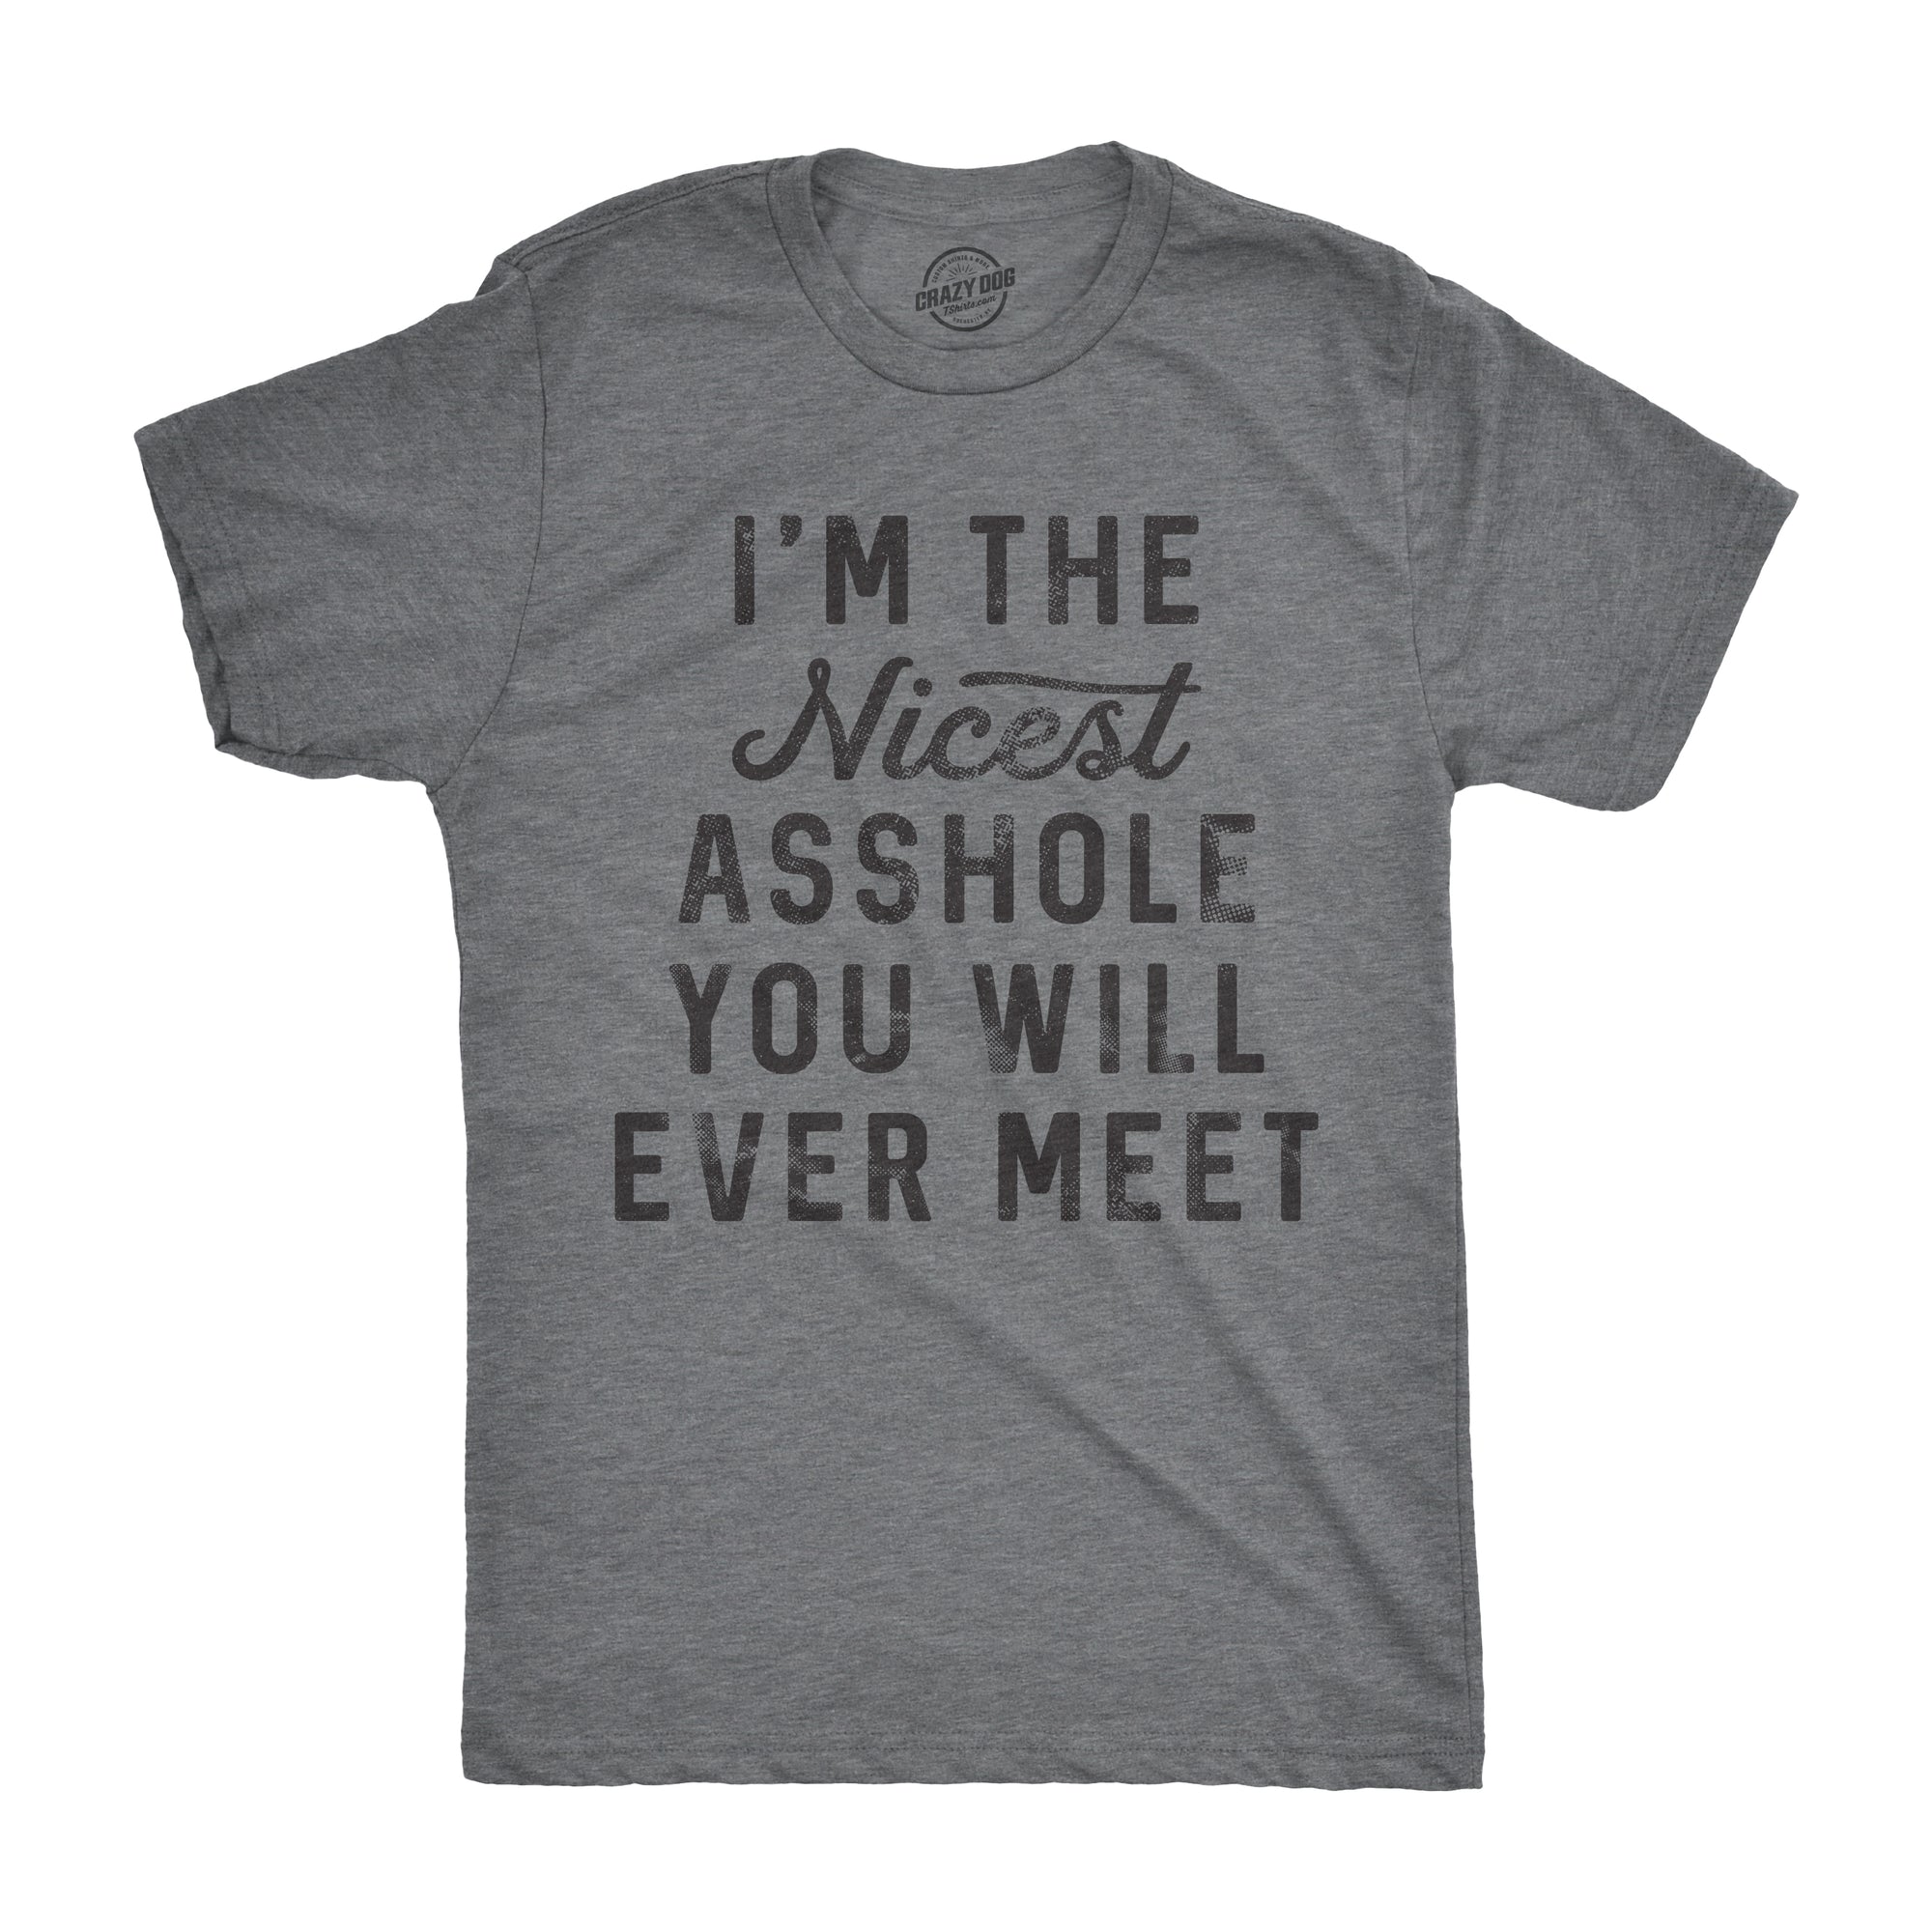 Funny Dark Heather Grey I'm The Nicest Asshole You Will Ever Meet Mens T Shirt Nerdy Sarcastic Tee